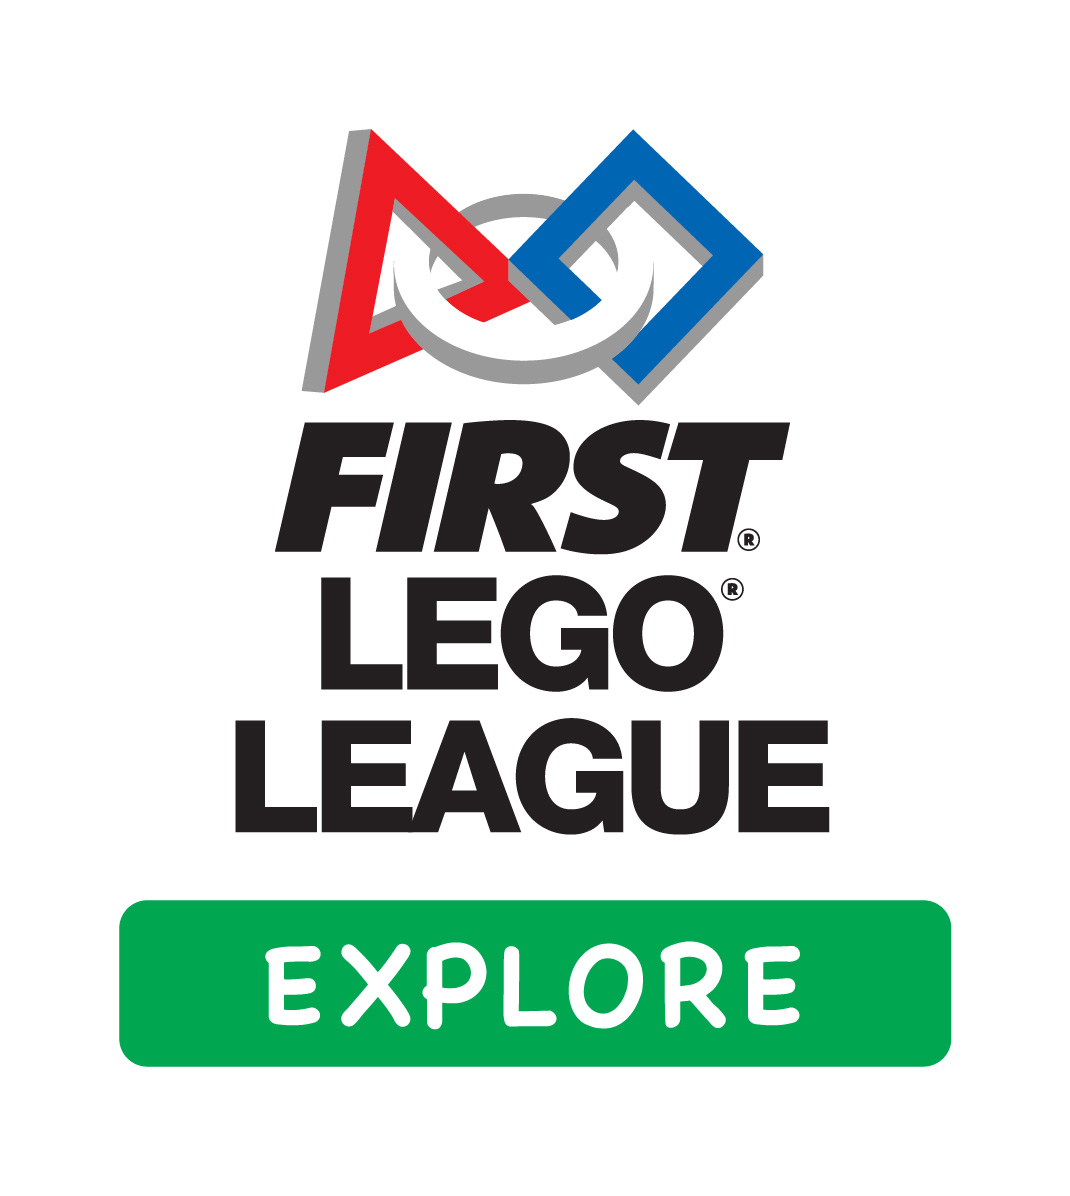 Learn more about FLL Explore